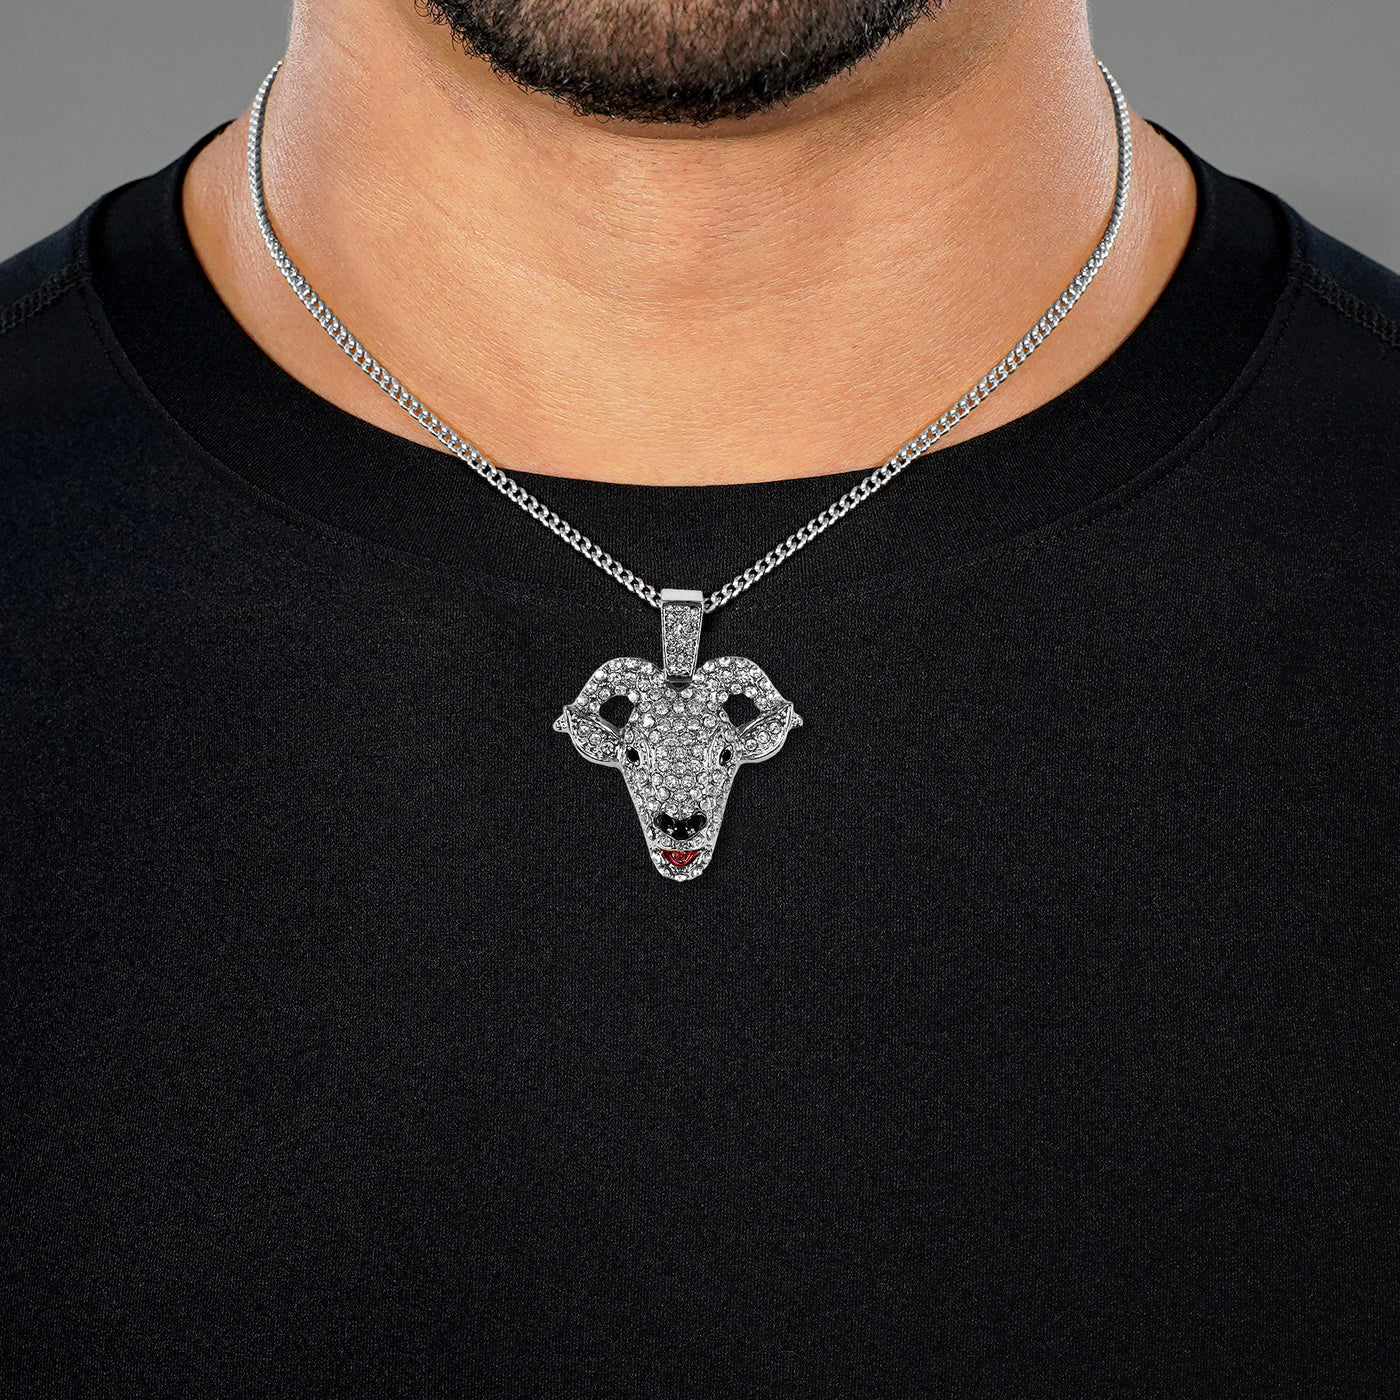 GOAT 1½" Pendant with Chain Necklace - Stainless Steel